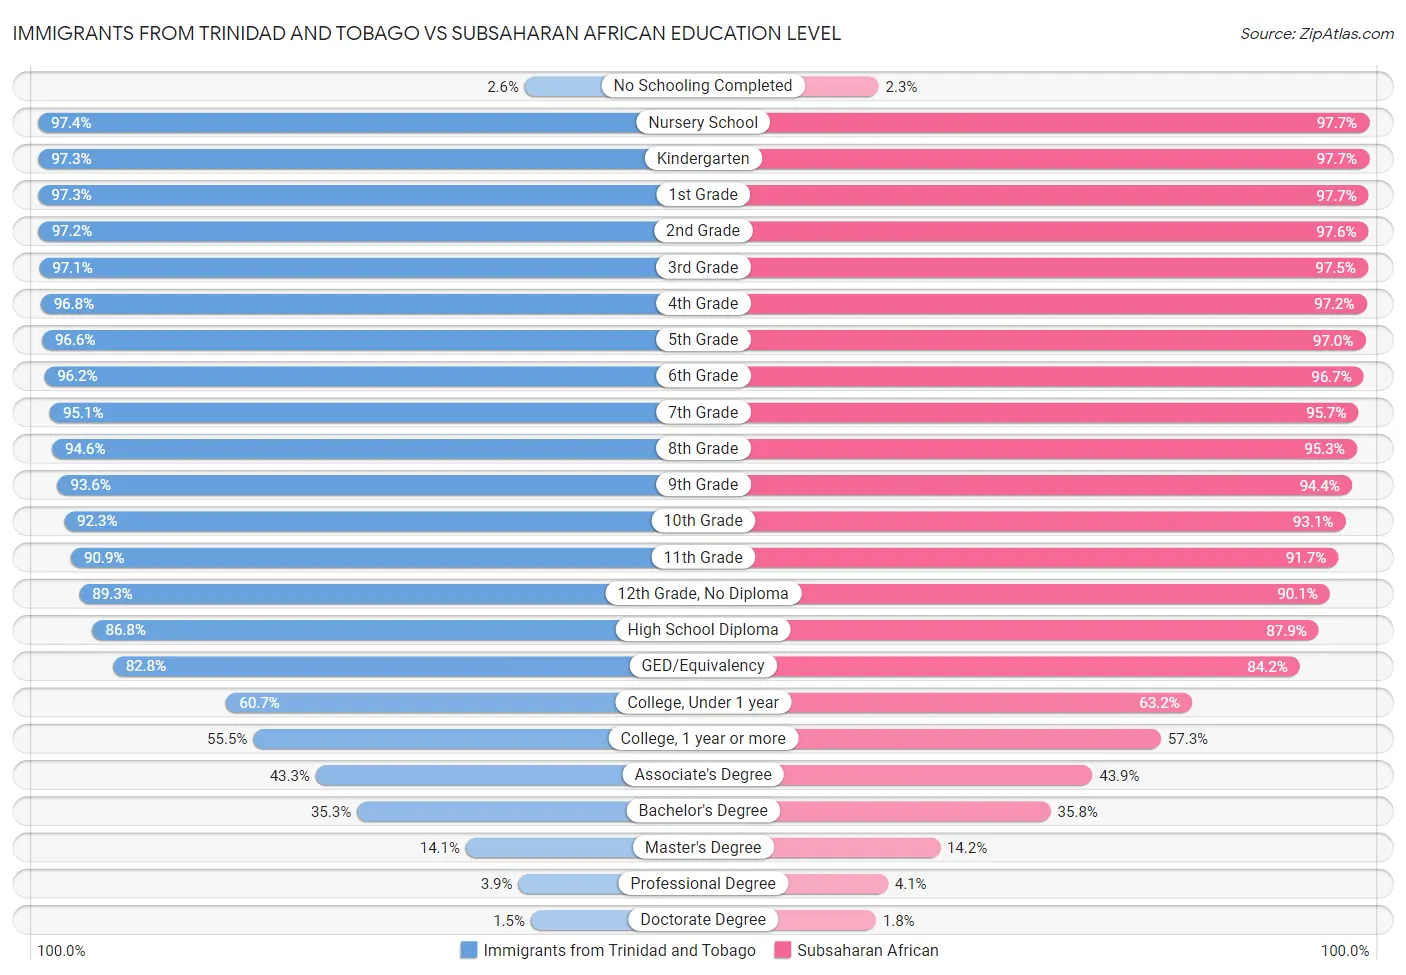 Immigrants from Trinidad and Tobago vs Subsaharan African Education Level